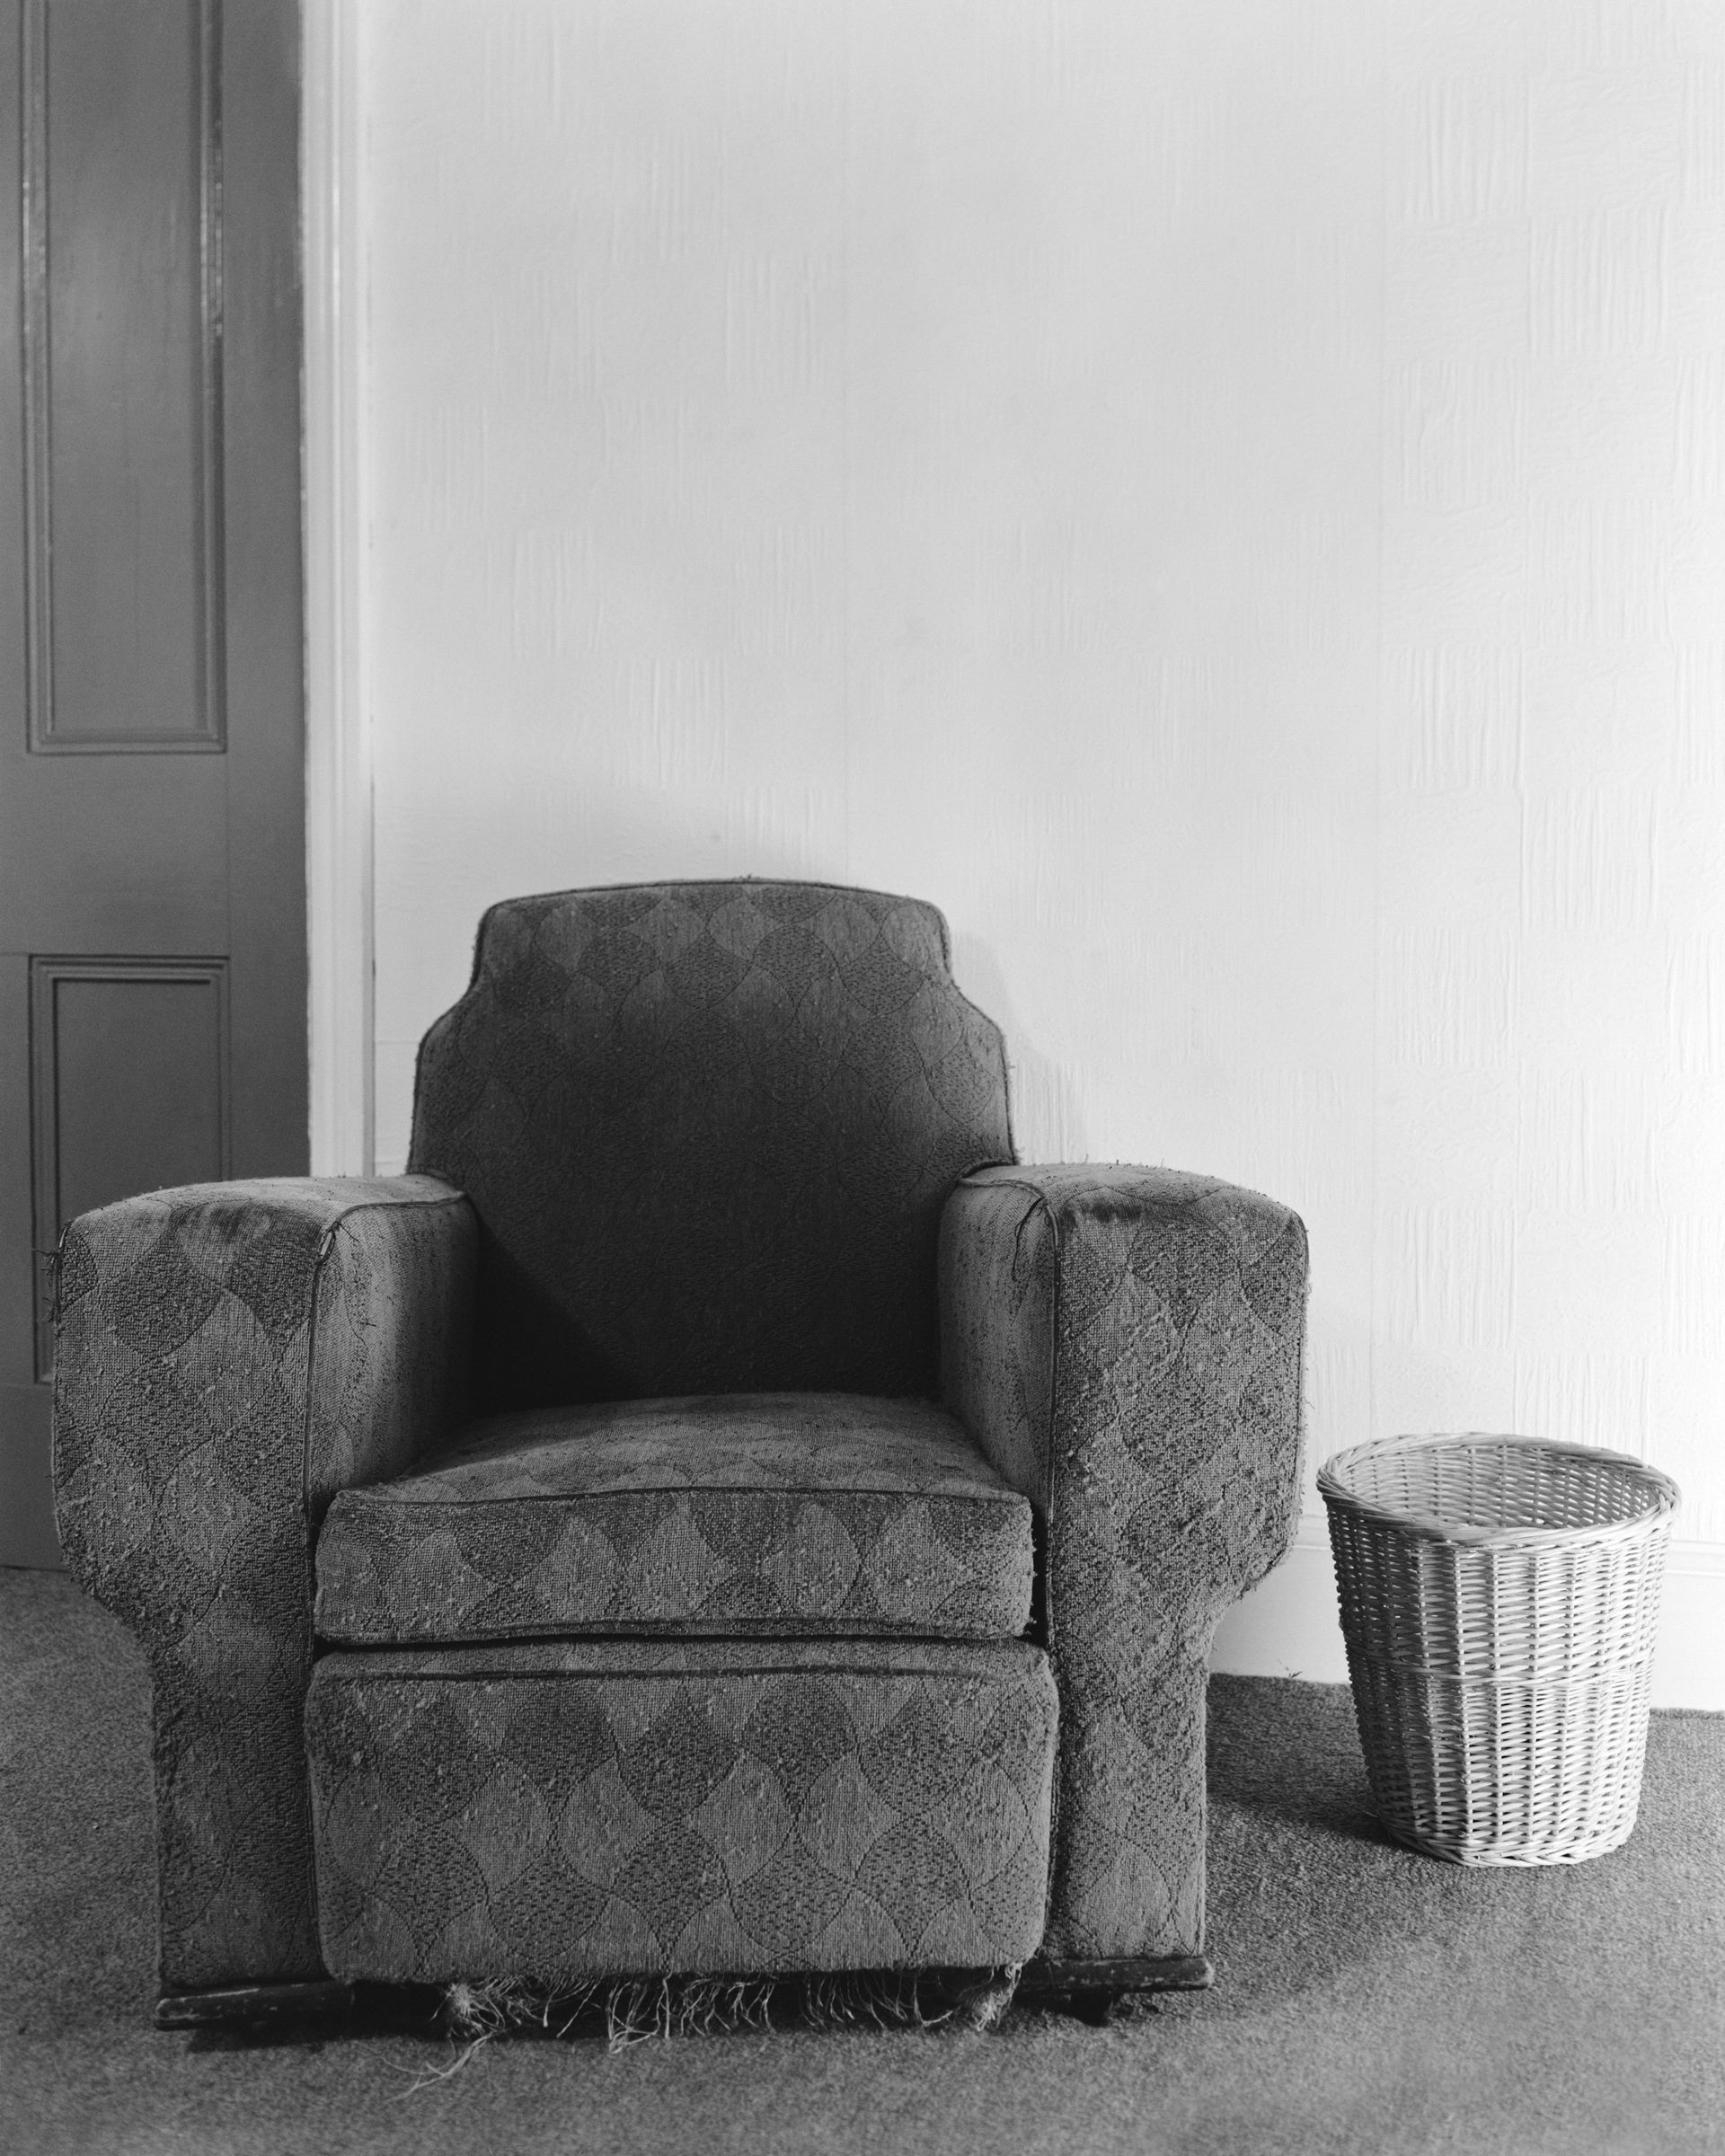 Black and white photograph of an empty armchair next to a wastepaper bin, which features in Life As It Is by John Myers